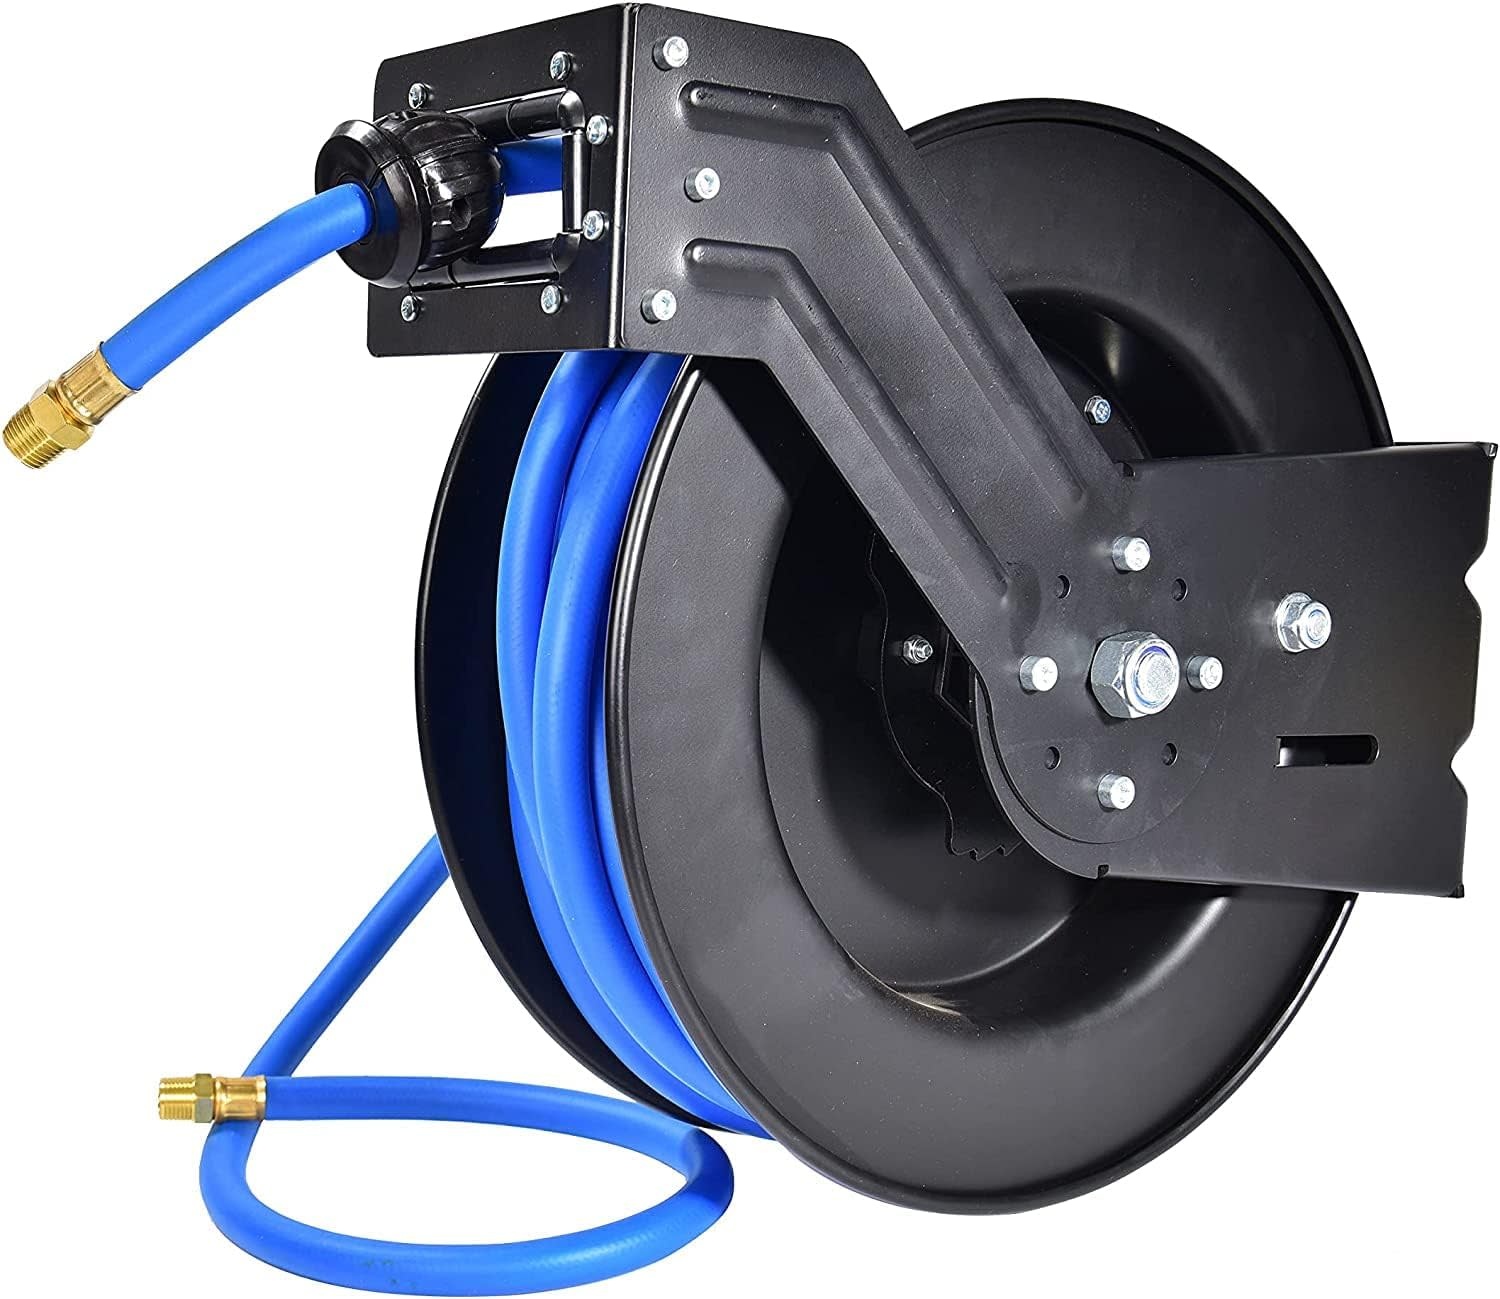 Retractable Air Hose Reel 1/2 in x 50 ft Wall Mount, EASYUSE 1/2